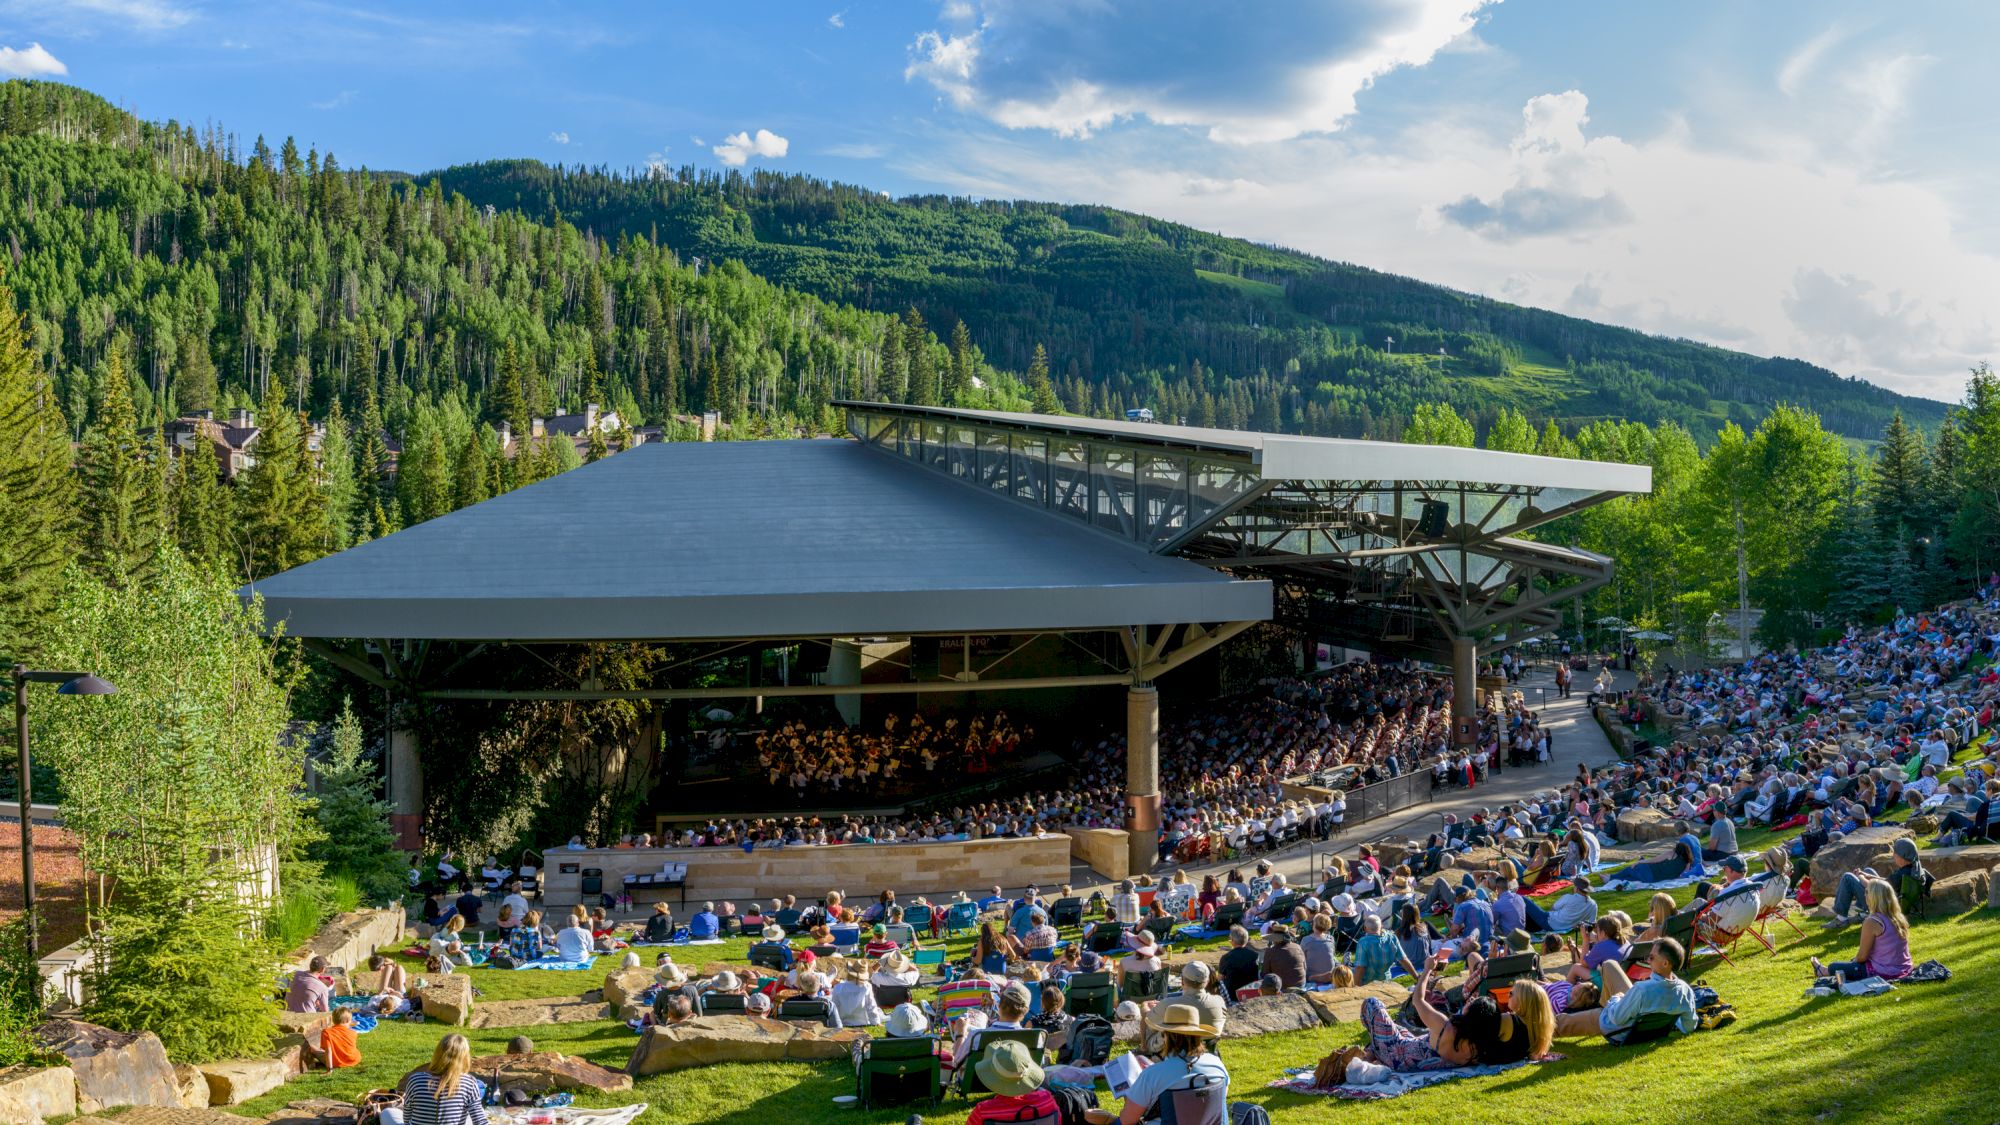 An outdoor amphitheater with people seated on a grassy slope, surrounded by lush greenery and mountains, under a partly cloudy sky.